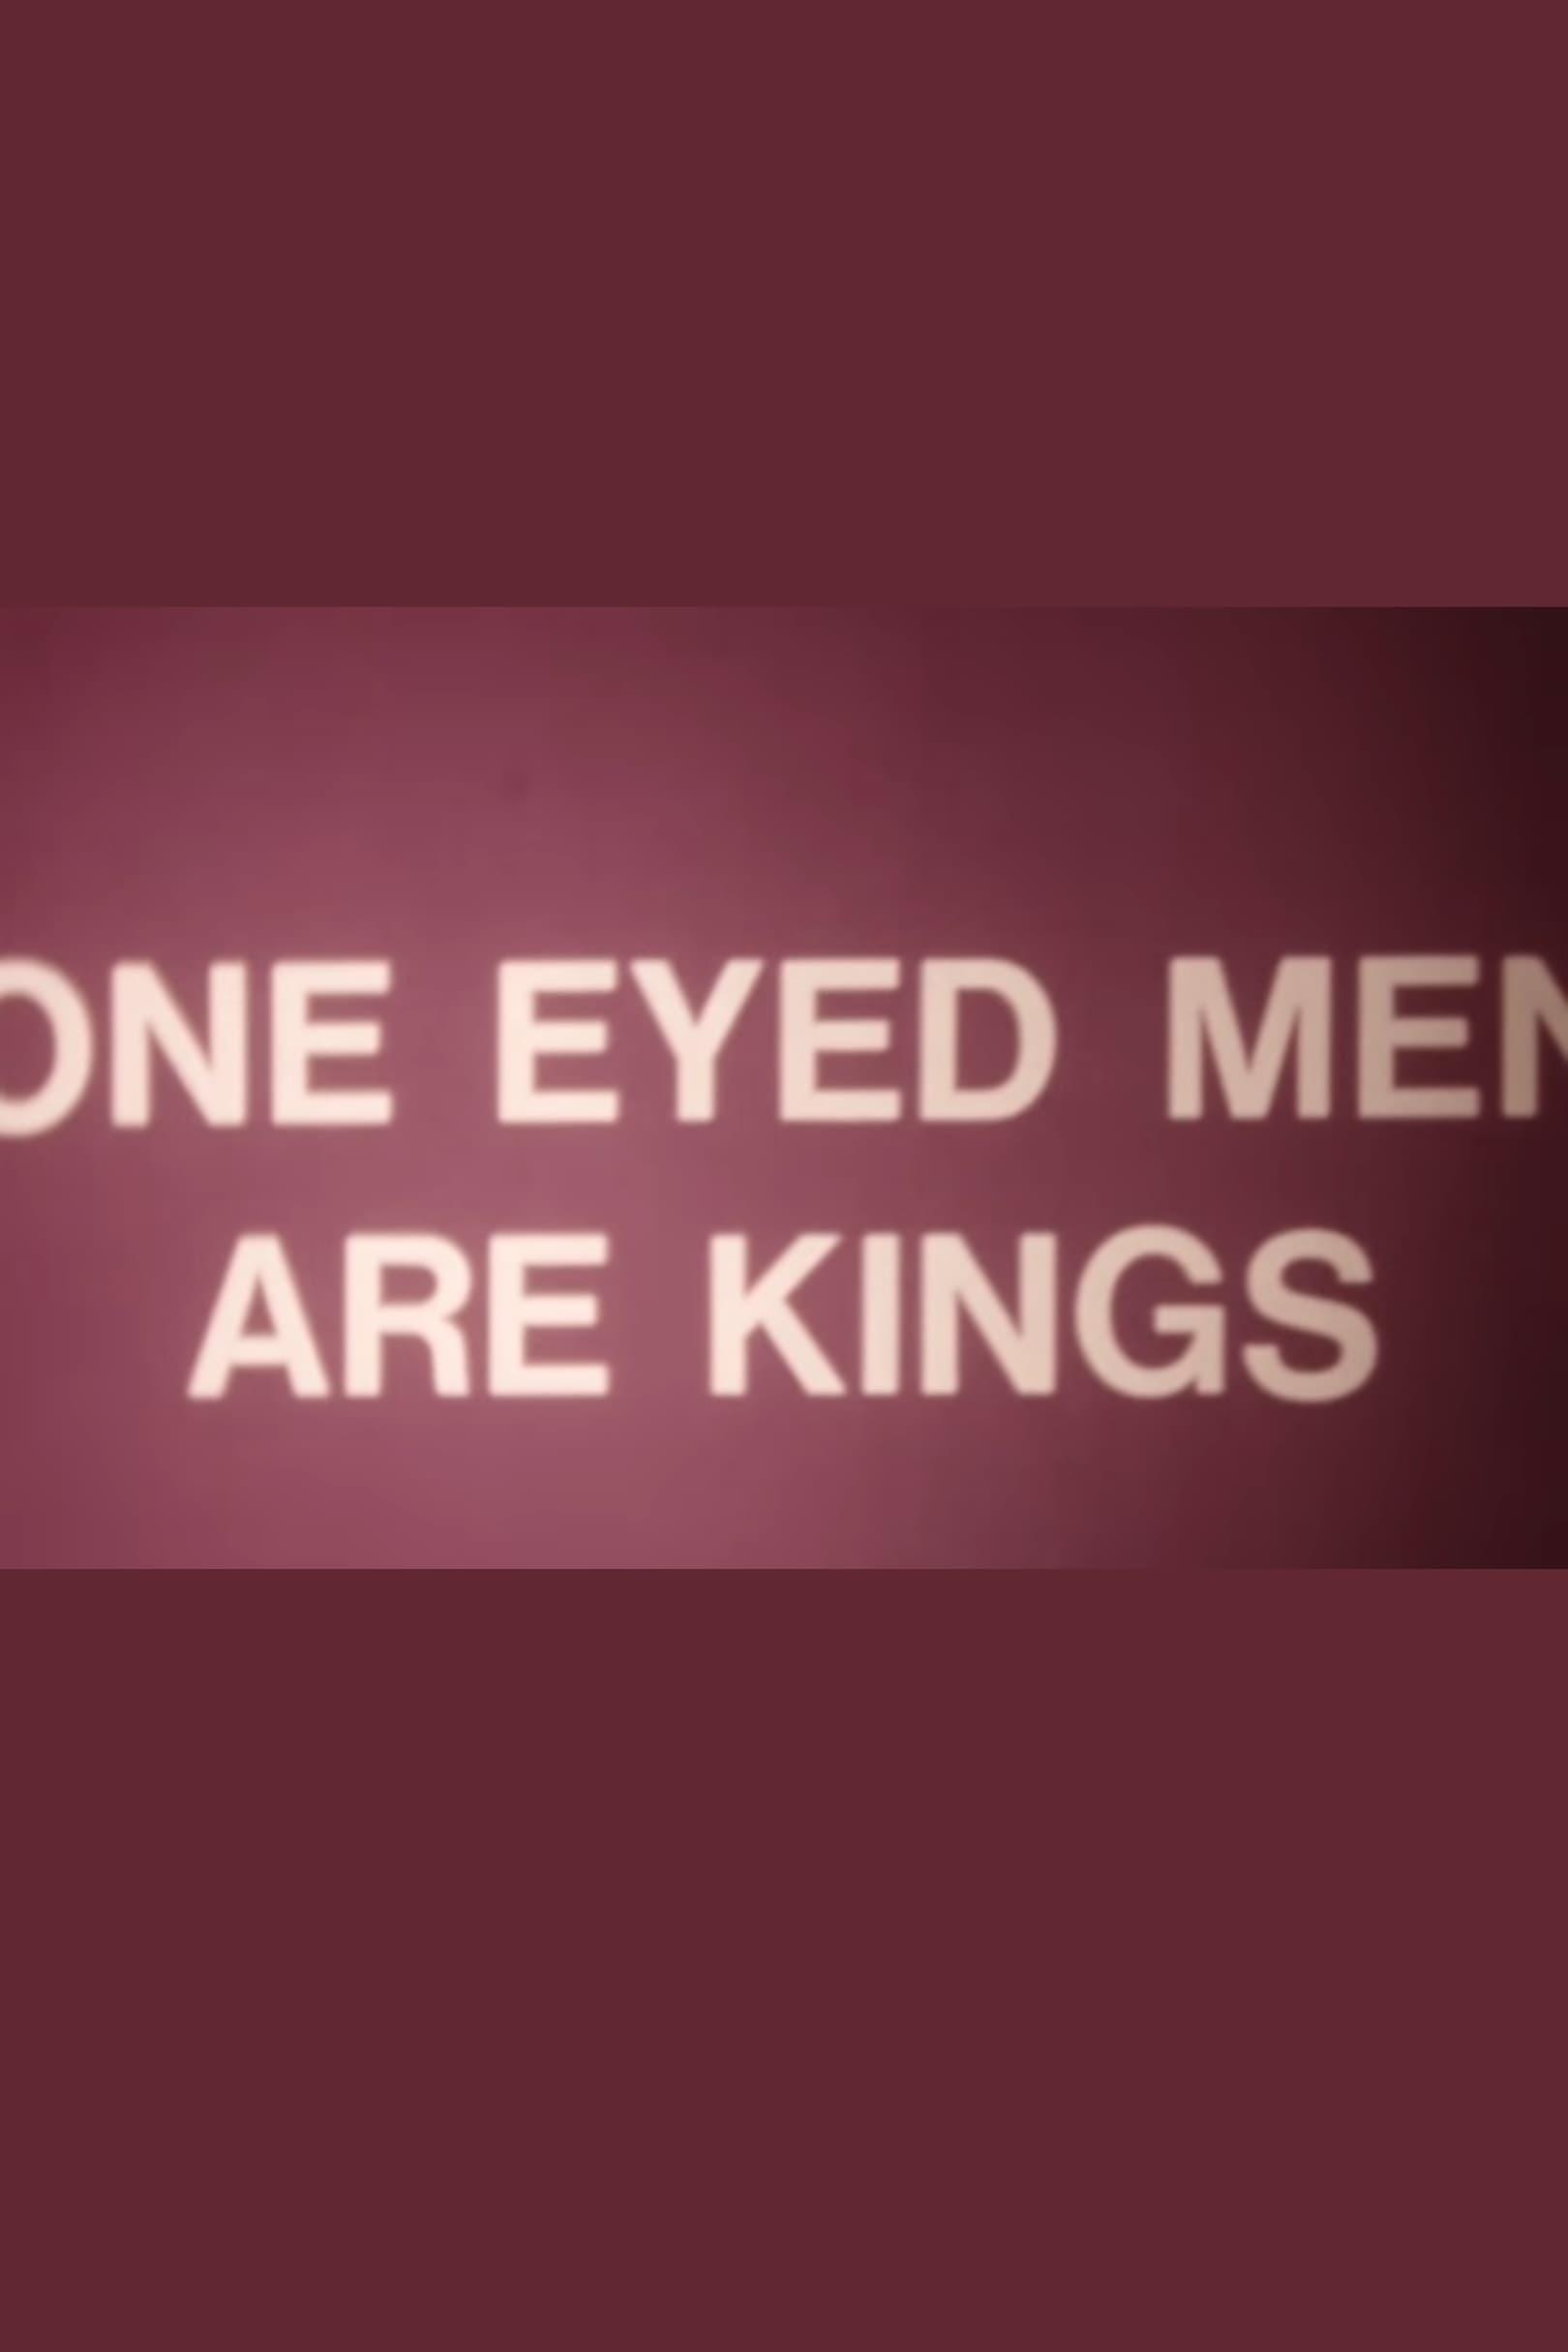 One-Eyed Men Are Kings poster